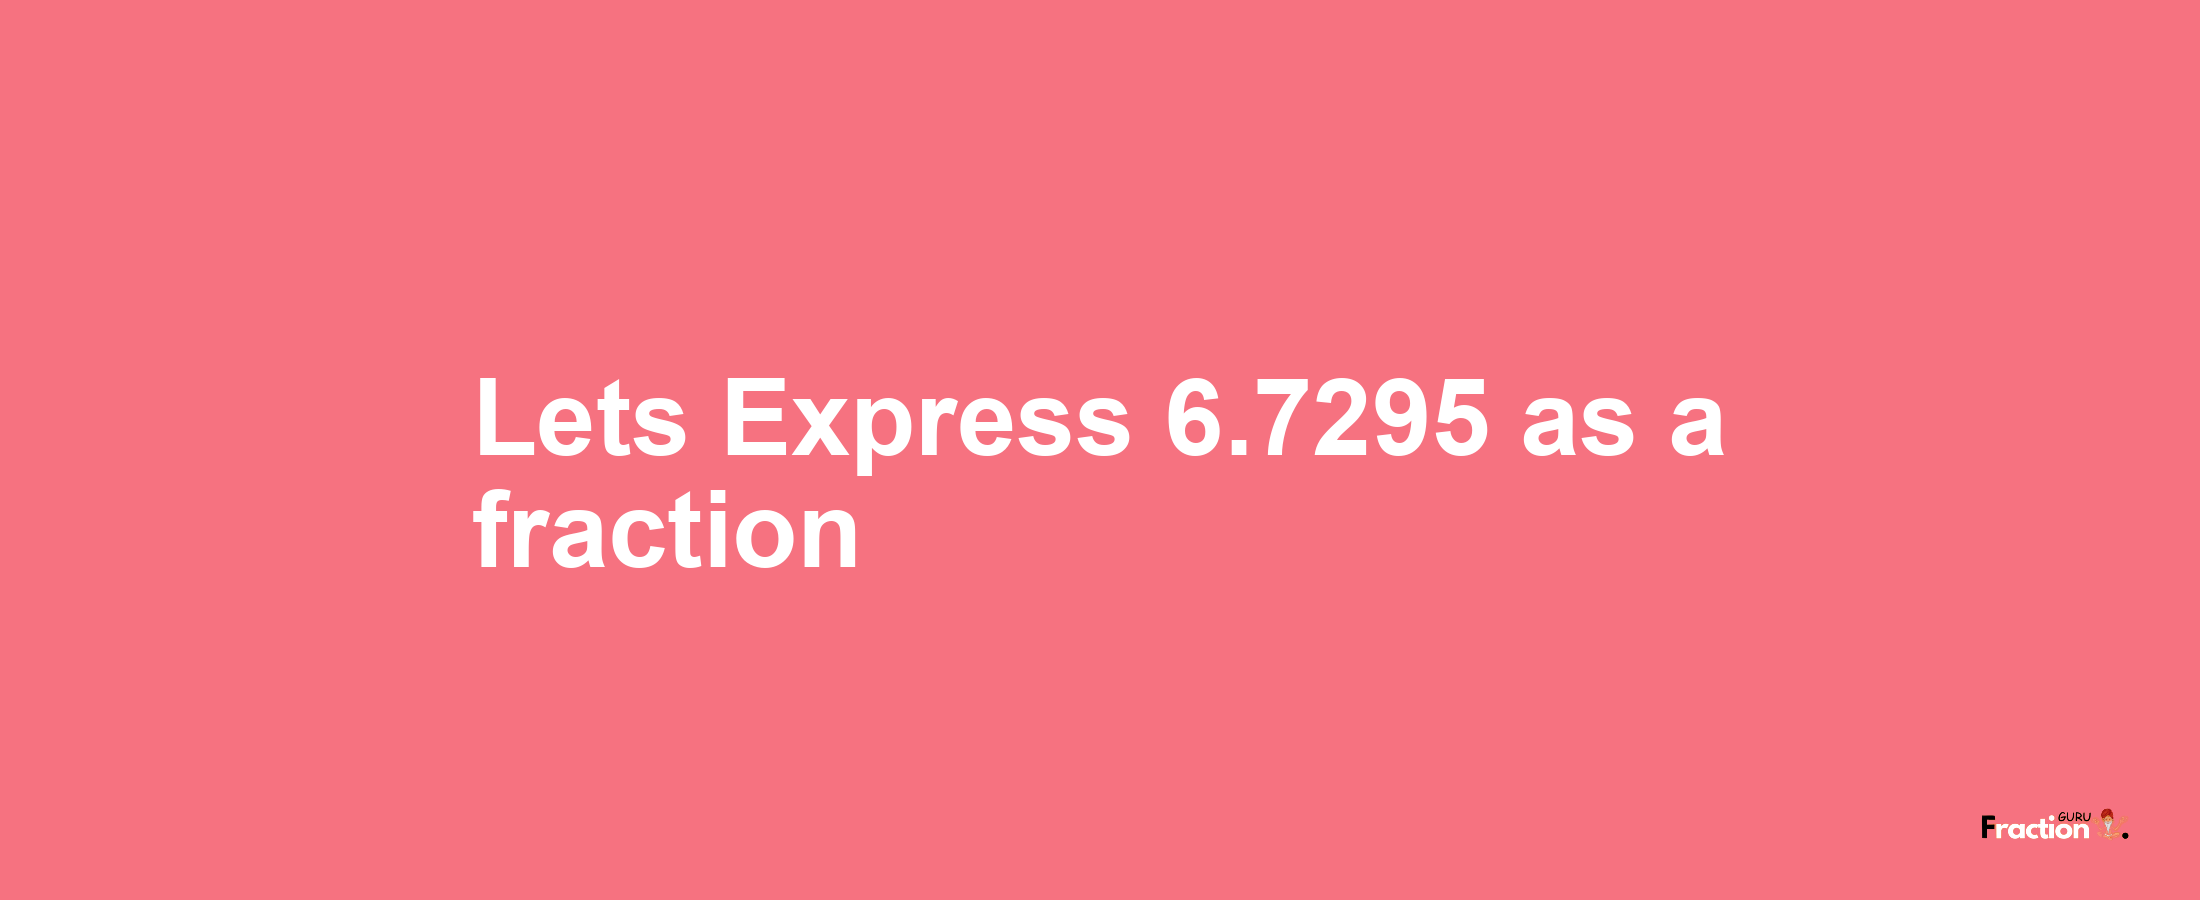 Lets Express 6.7295 as afraction